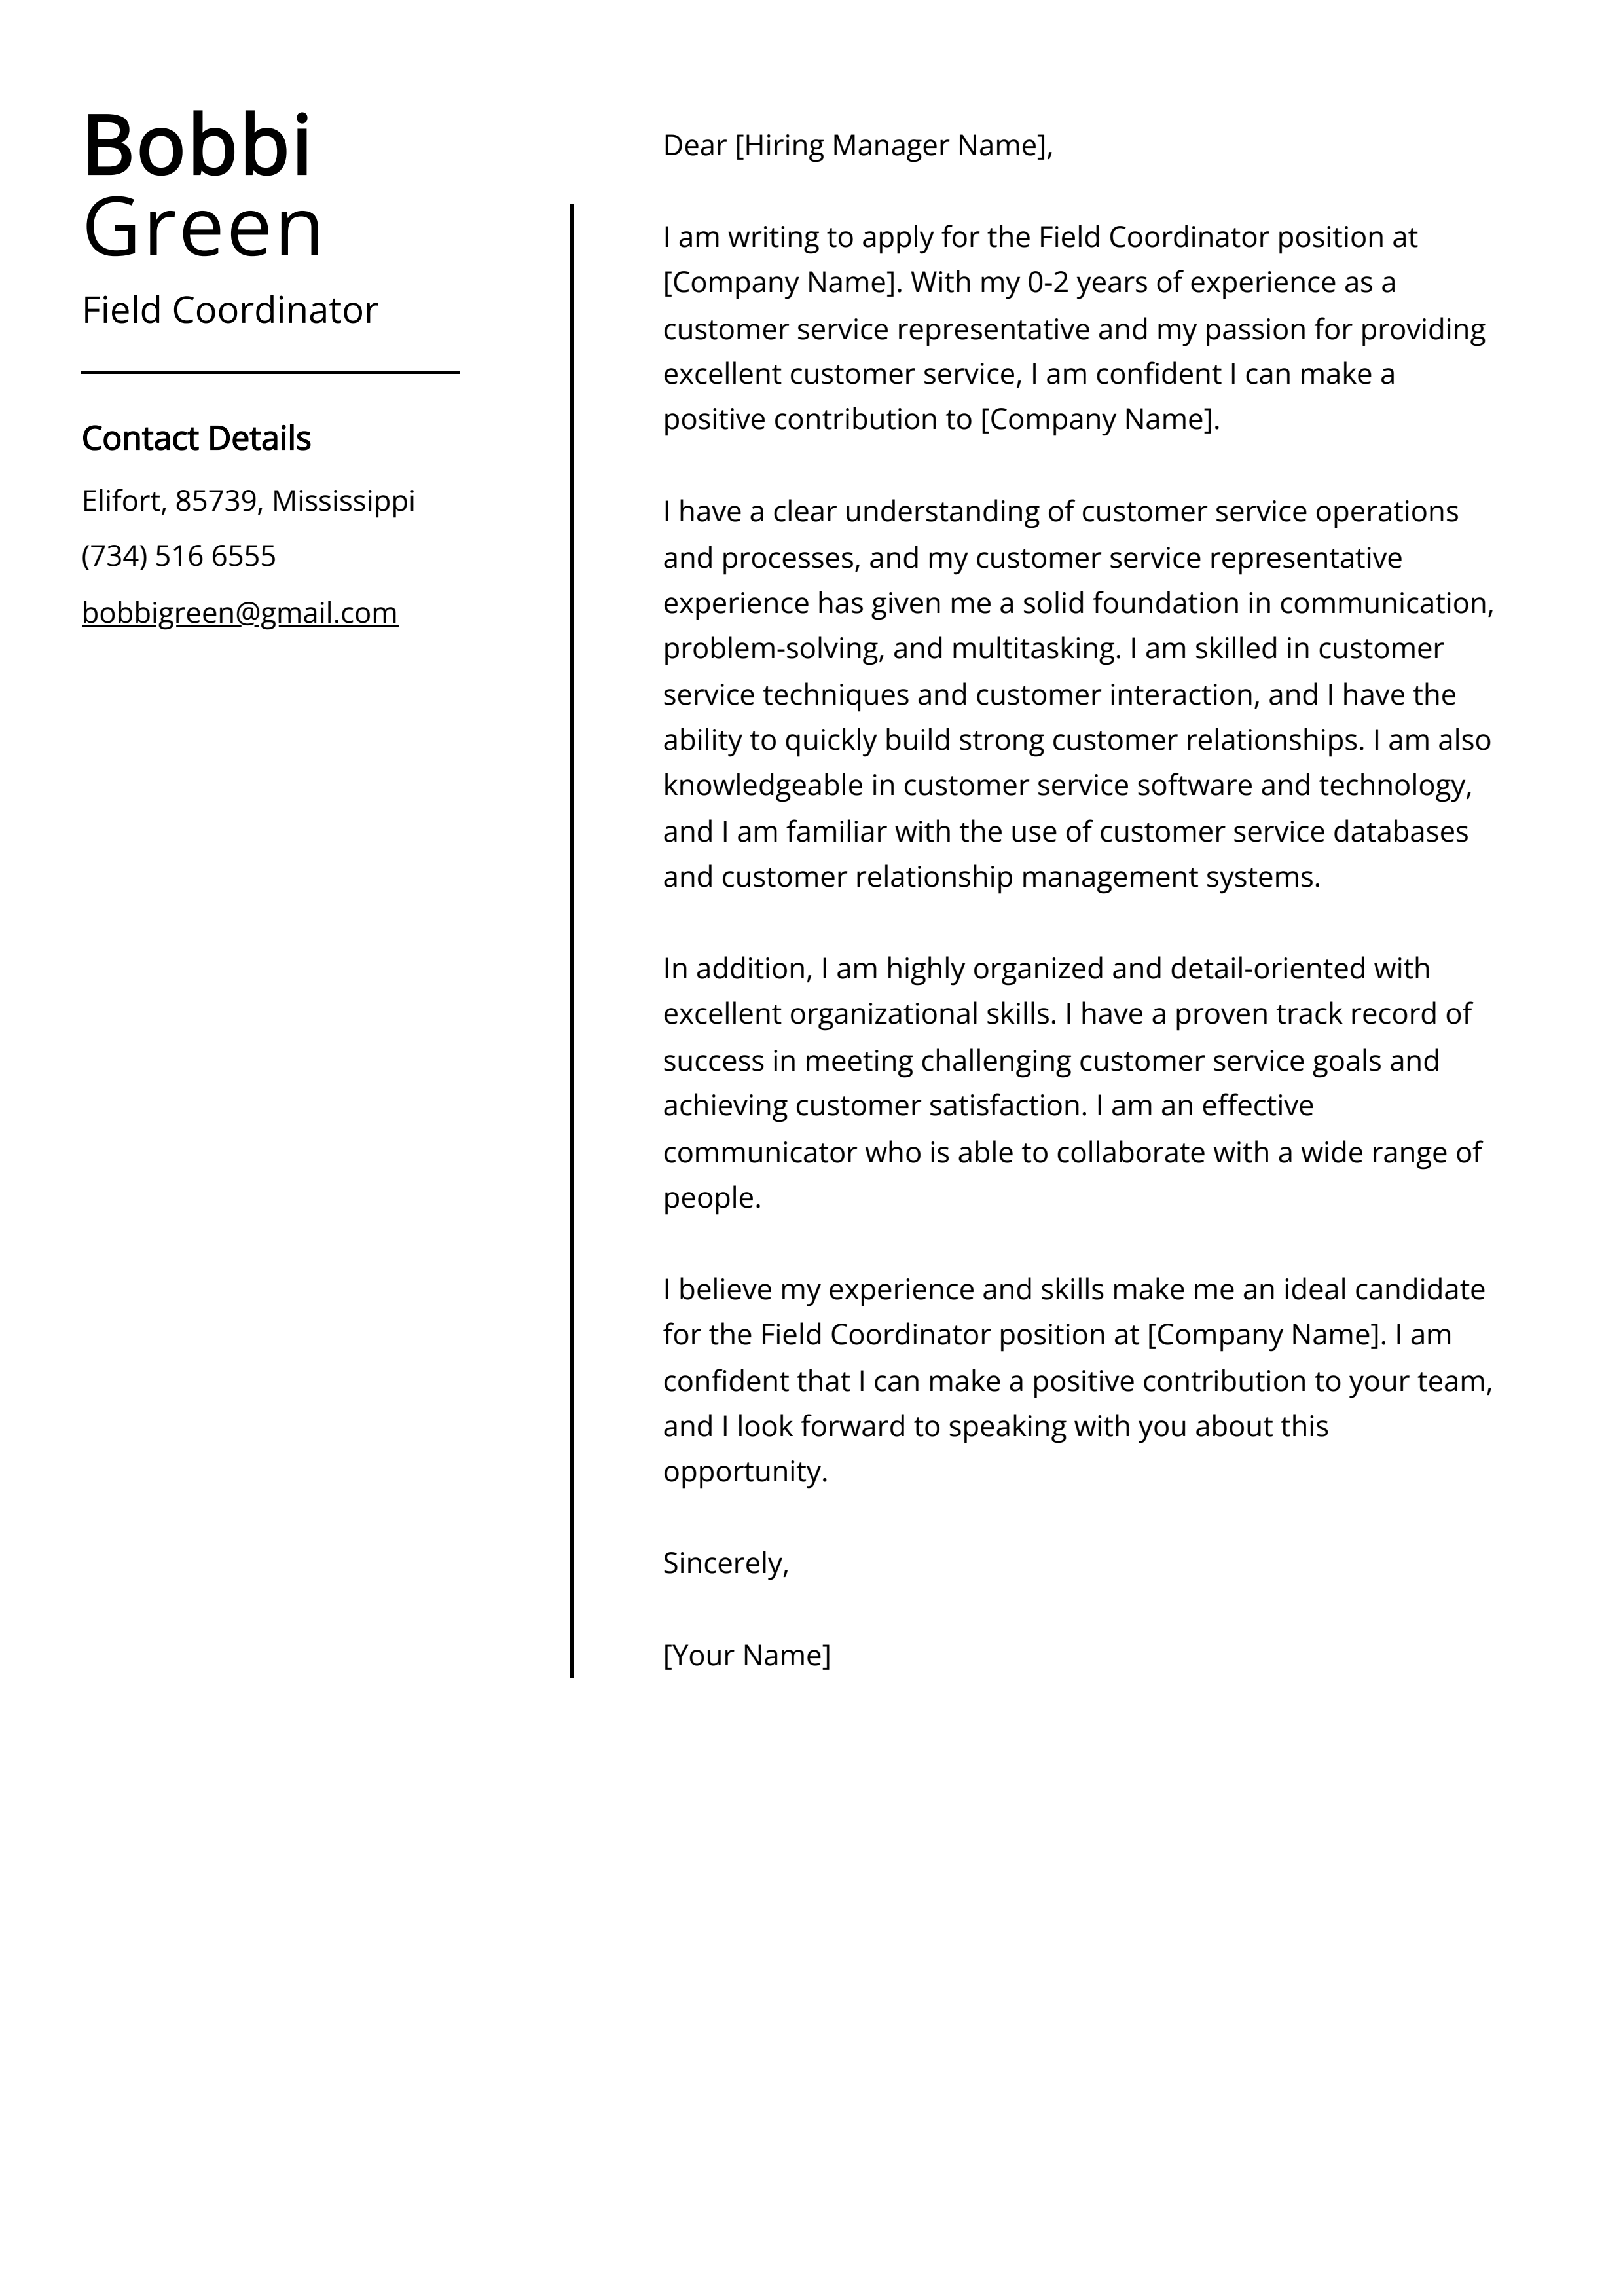 Field Coordinator Cover Letter Example